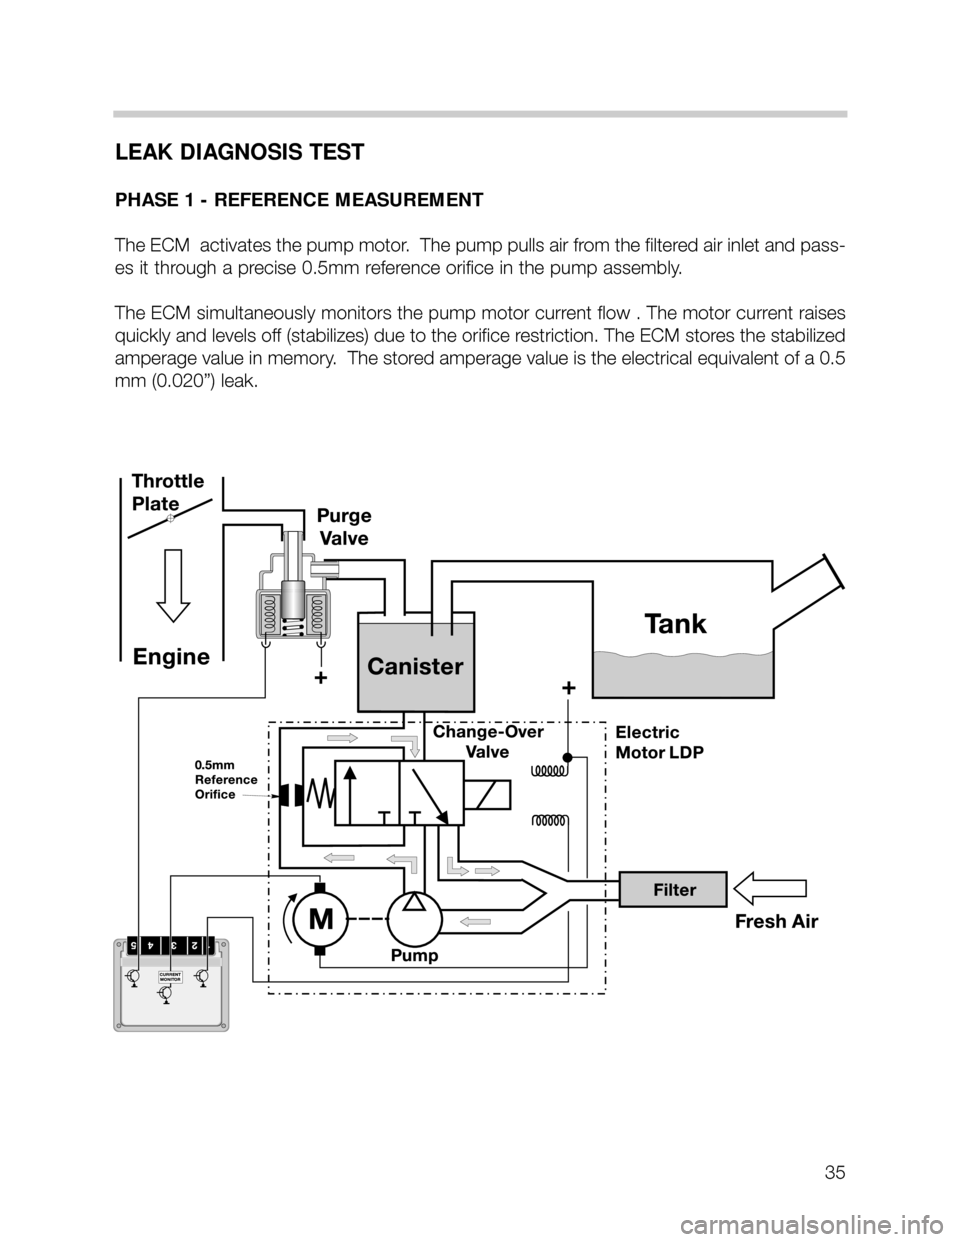 BMW 540i 1999 E39 M62TU Engine Owners Guide LEAK DIAGNOSIS TEST
PHASE 1 - REFERENCE MEASUREMENT
The ECM  activates the pump motor.  The pump pulls air from the filtered air inlet and pass-
es it through a precise 0.5mm reference orifice in the 